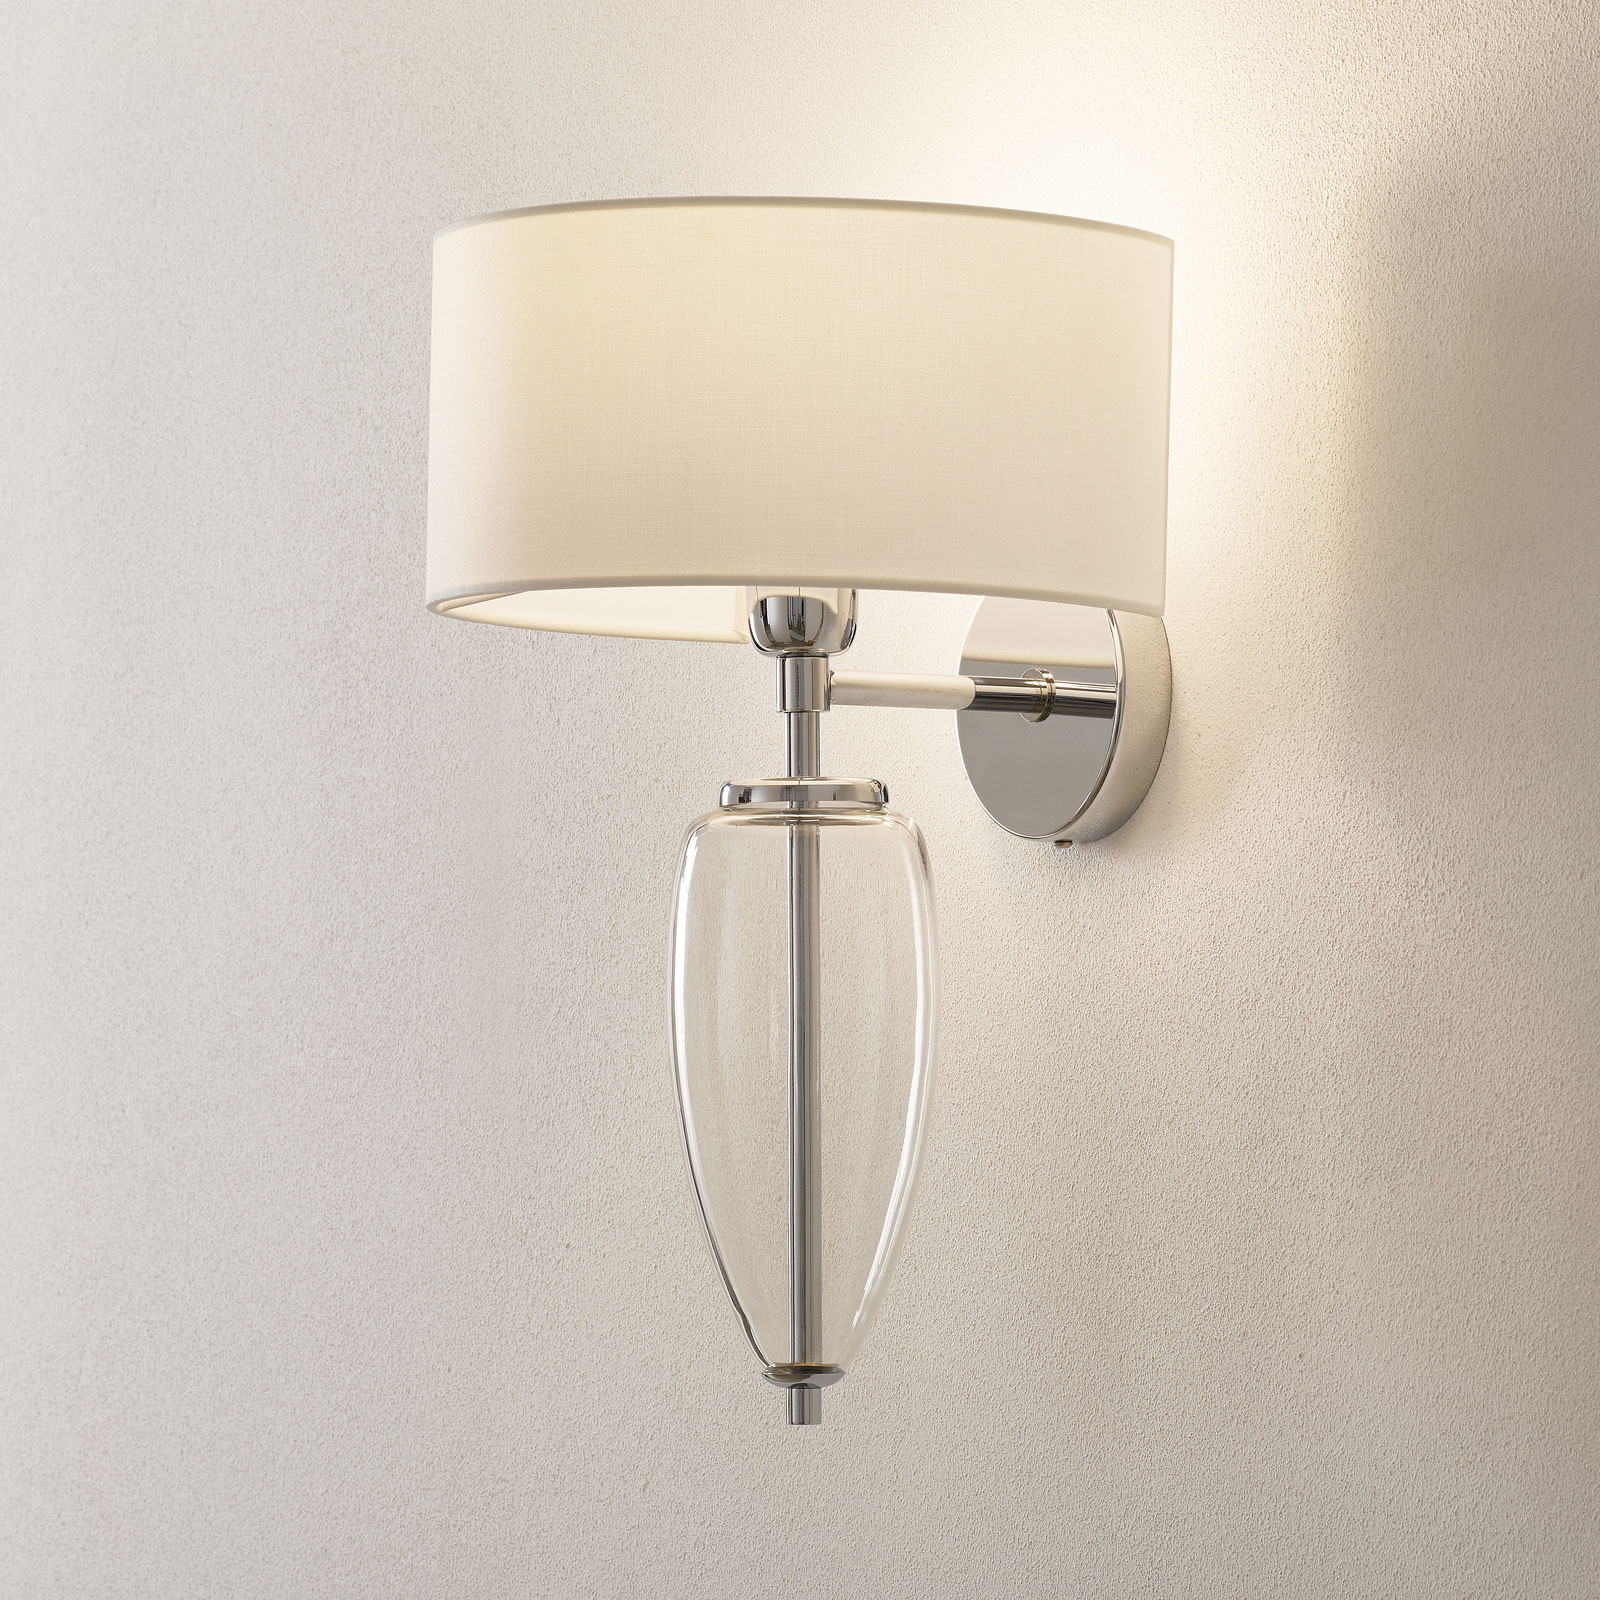 Show Ogiva wall lamp with clear glass element